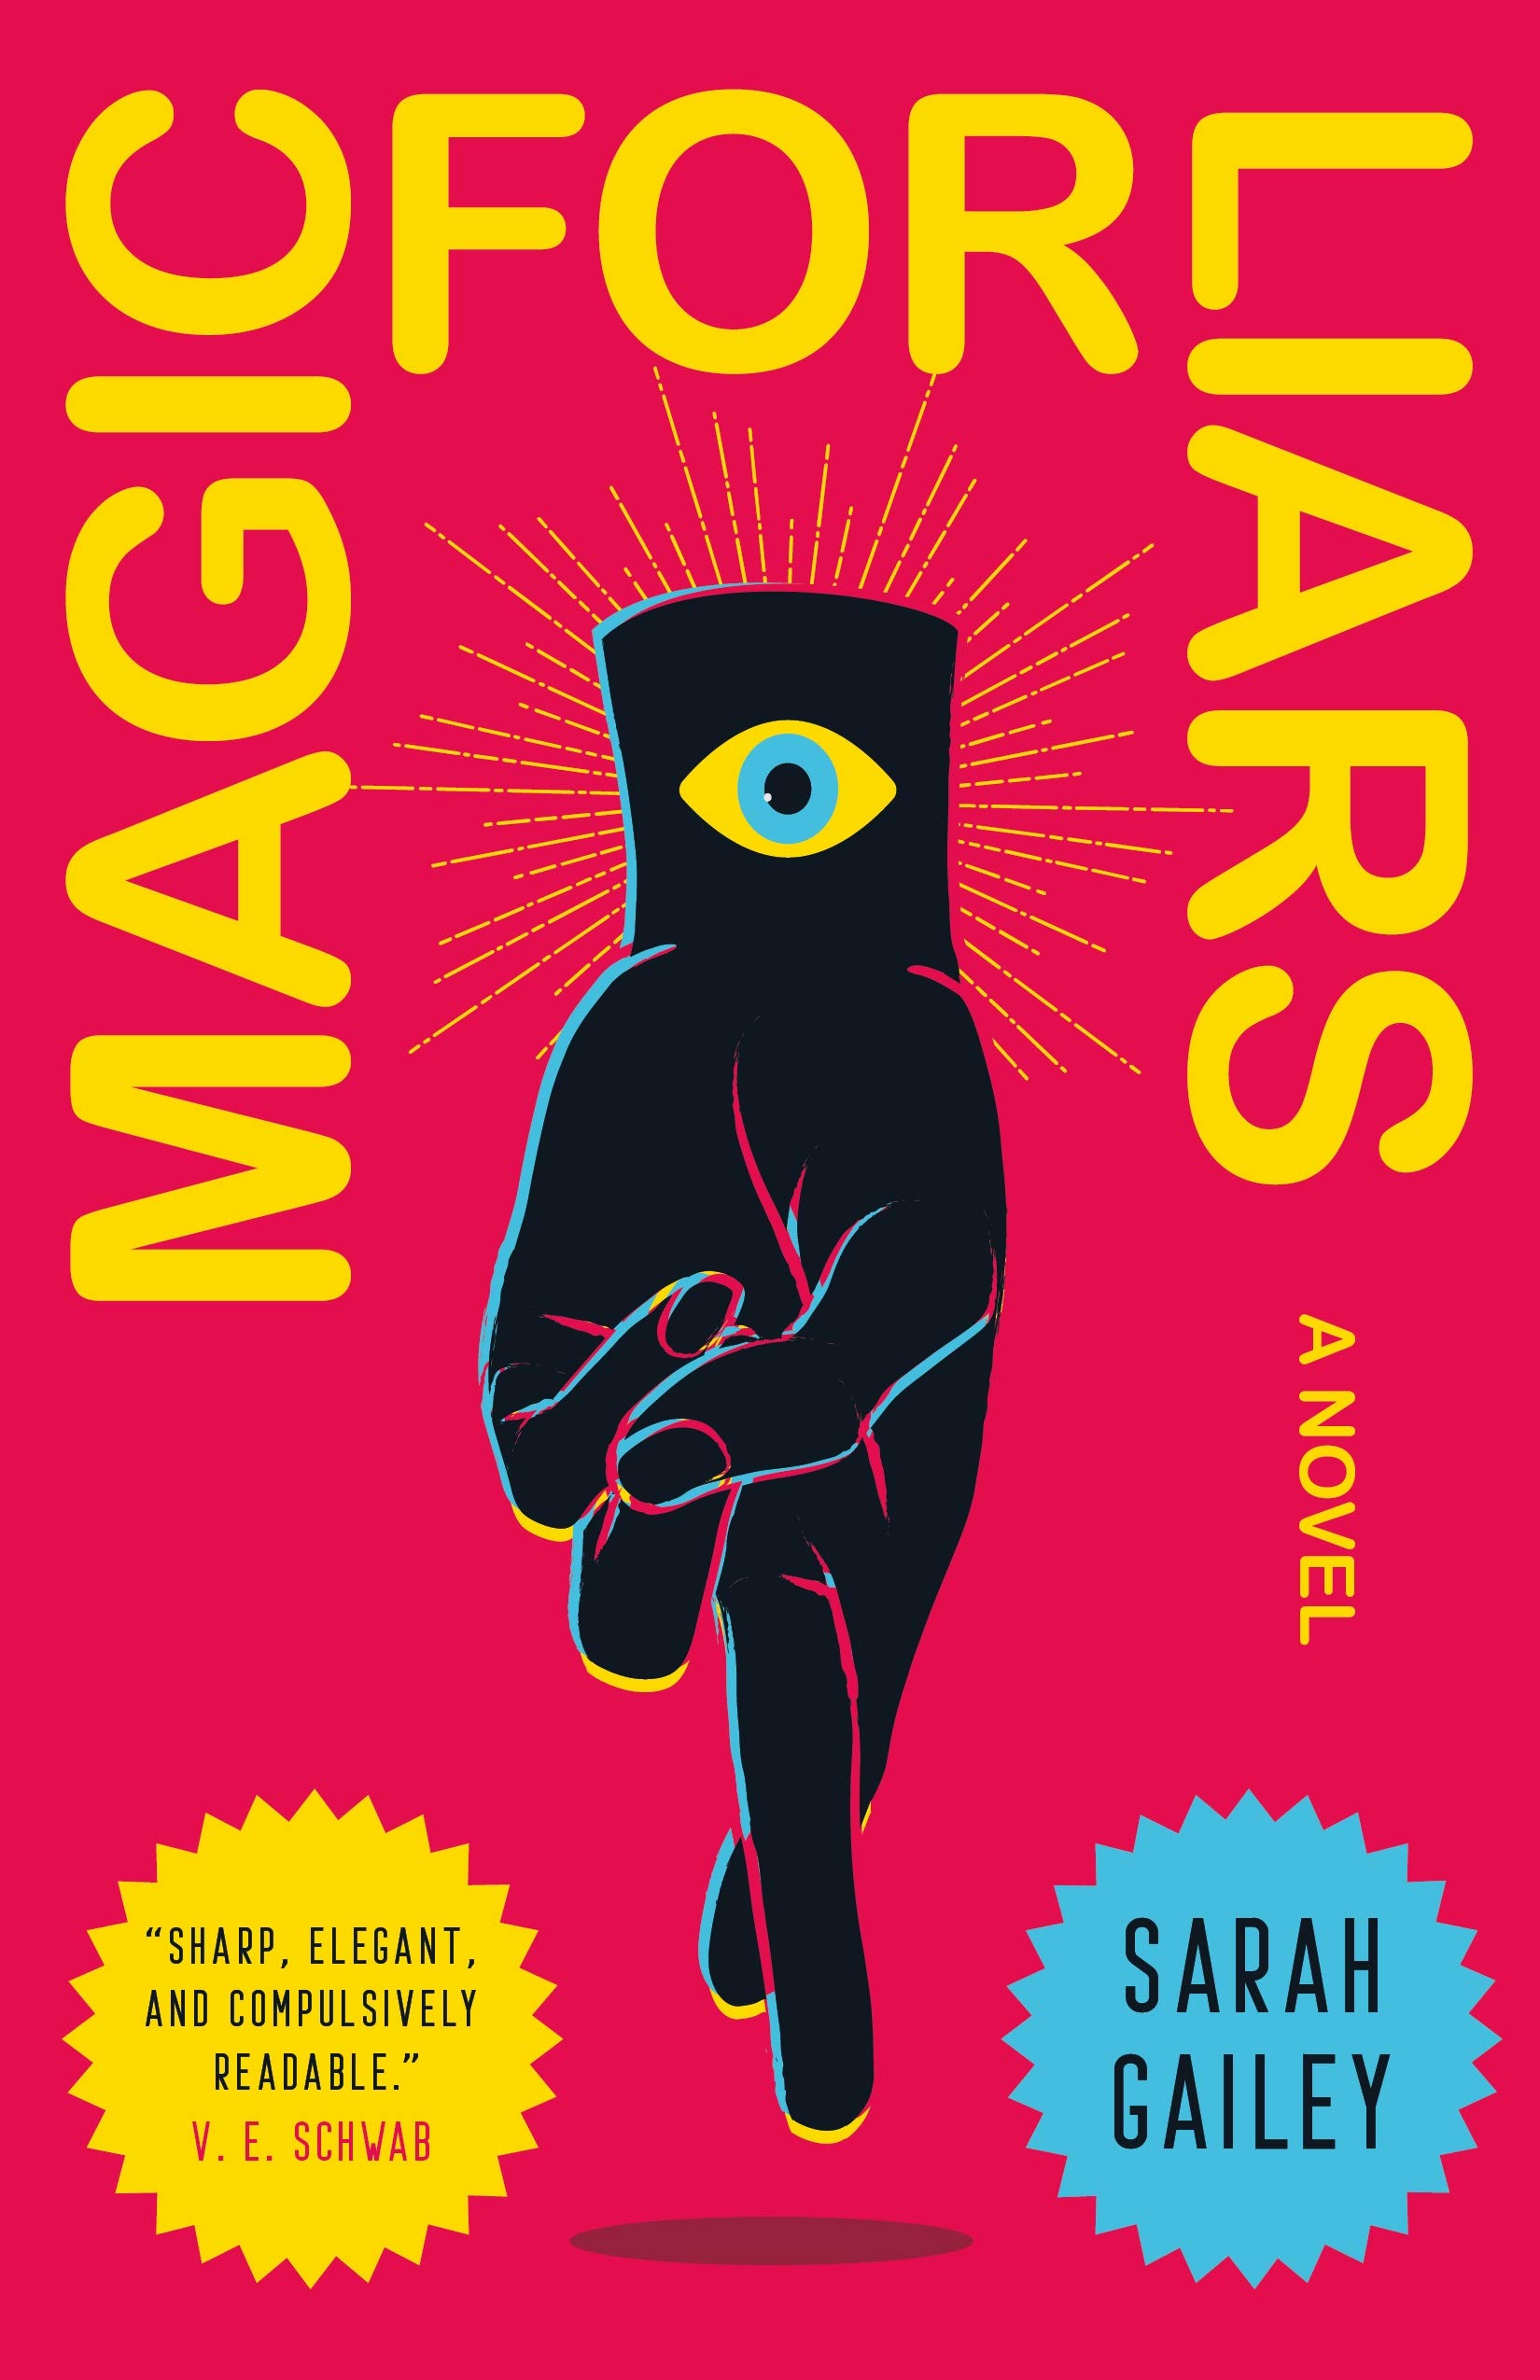 A bright pink cover shows a black hand upside down with its fingers crossed and a mystical eye on the wrist. the title of the book frames it in large yellow layers.